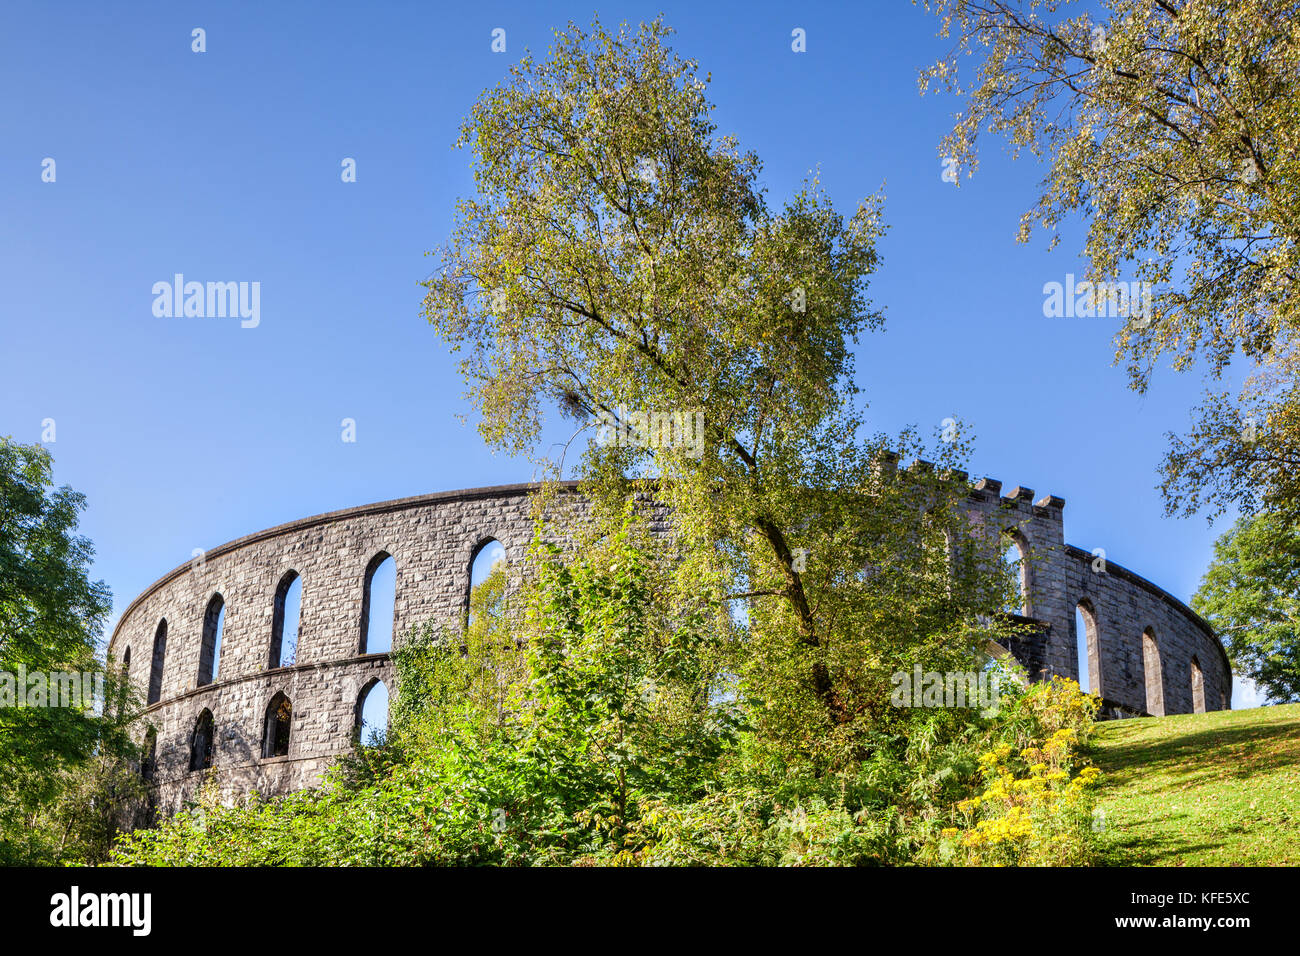 Mccaigs tower, Oban, Argyll and bute, Ecosse, Royaume-Uni. Banque D'Images